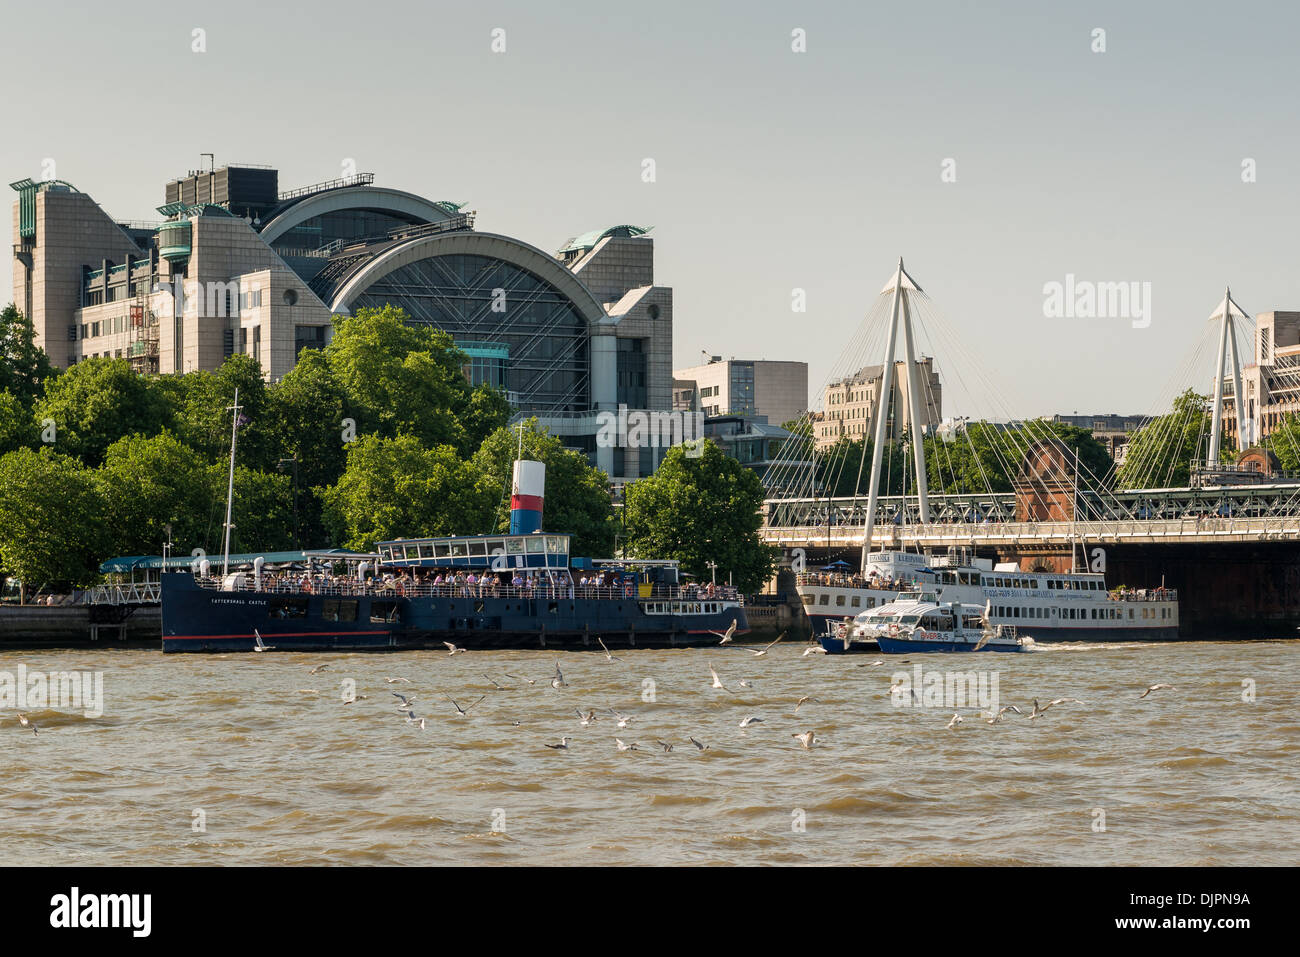 Seagulls on the Thames, river traffic, pleasure boats and Charing Cross station Stock Photo